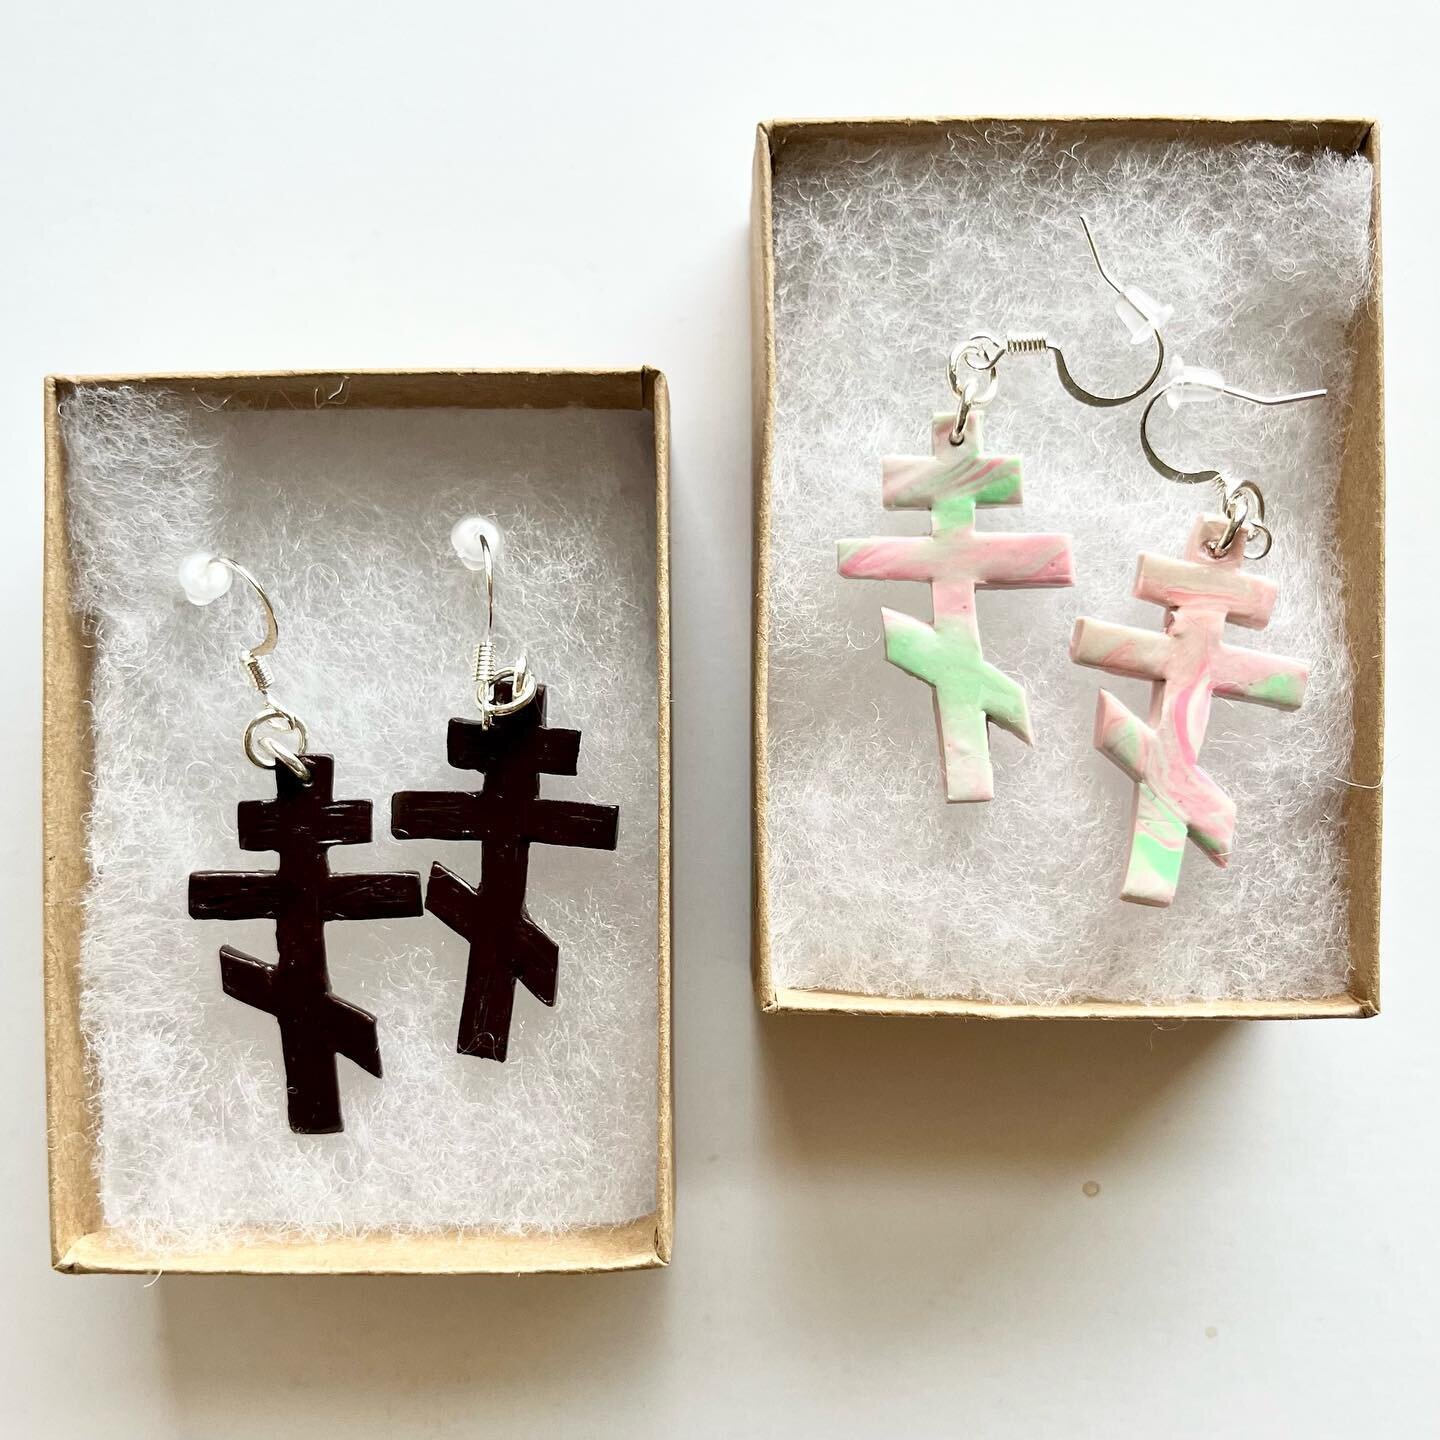 Brand new (and super cute!!), these handmade ☦️ earrings are light as a feather! Choose between green+pink swirls or brown wood grain, and get excited because they&rsquo;re even cuter in person!! Find them in the Apparel + Accessories shop section!